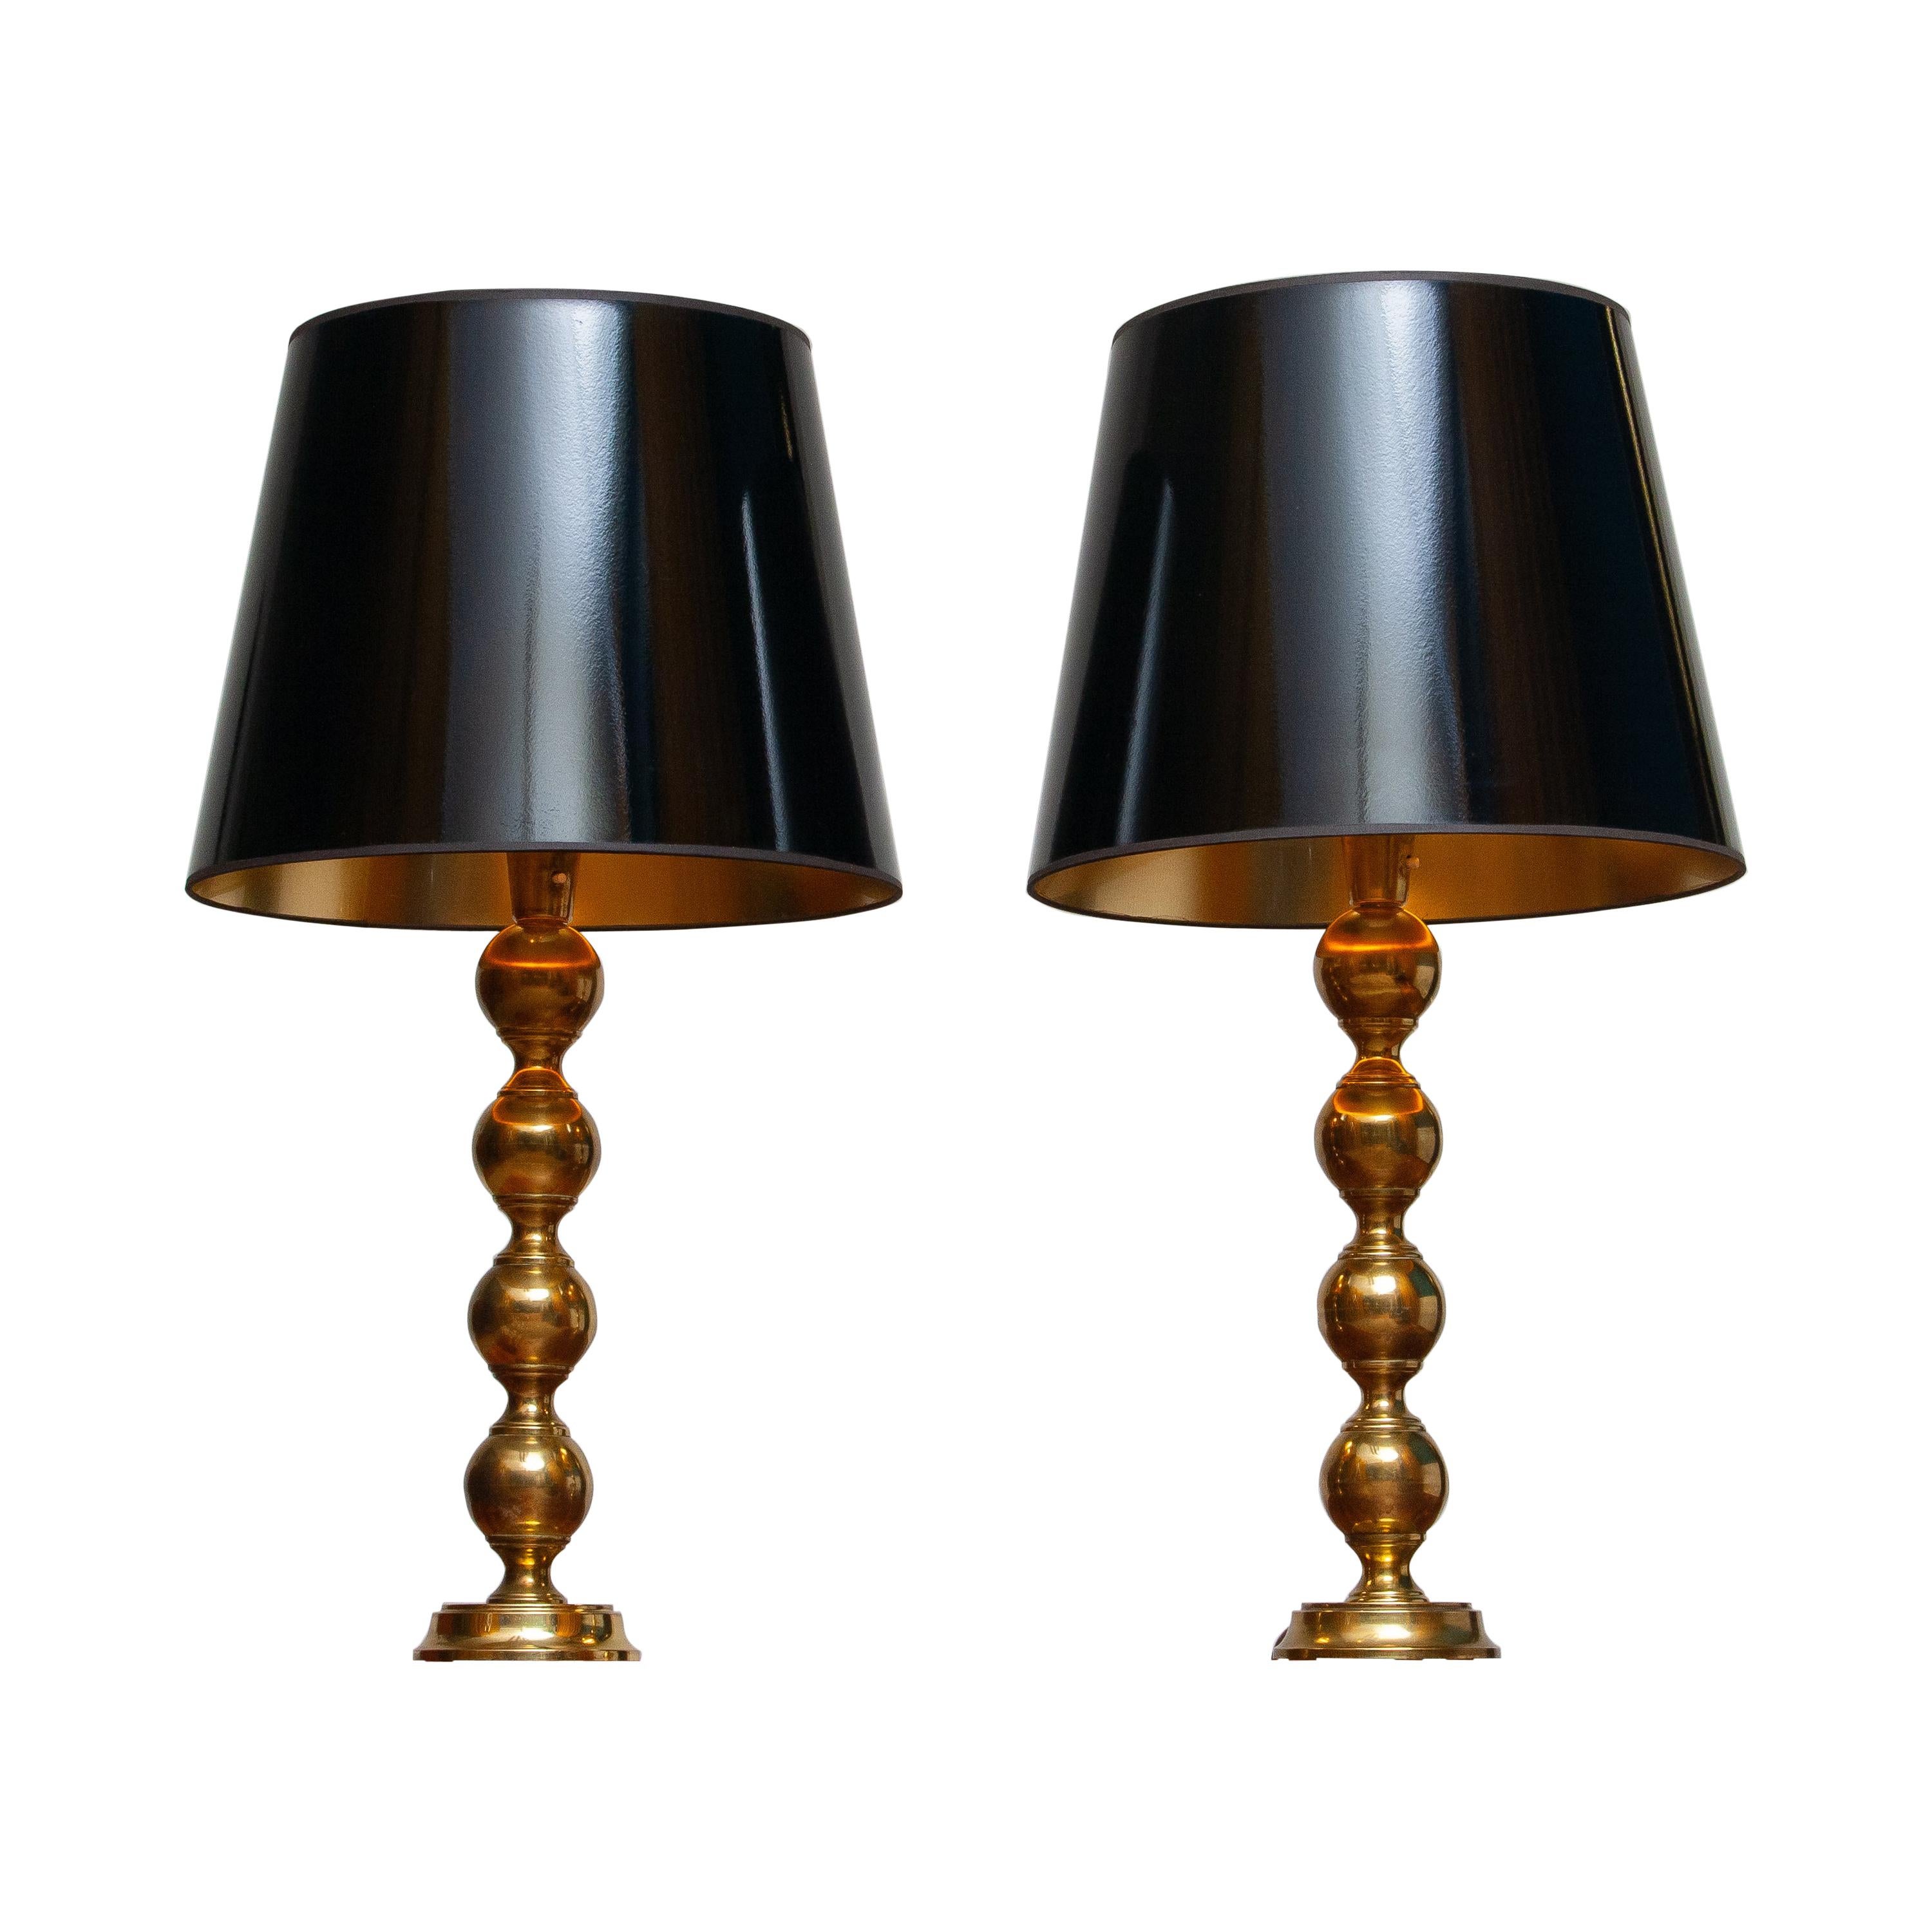 These beautiful extra large brass 1950s spherical table lamps are extremely rare and in great condition.
Suits 110 / 230 volts and have both one E27 / 28 bulb with switch. Technically 100%
The brass stand alone is 20 inches in height. Together